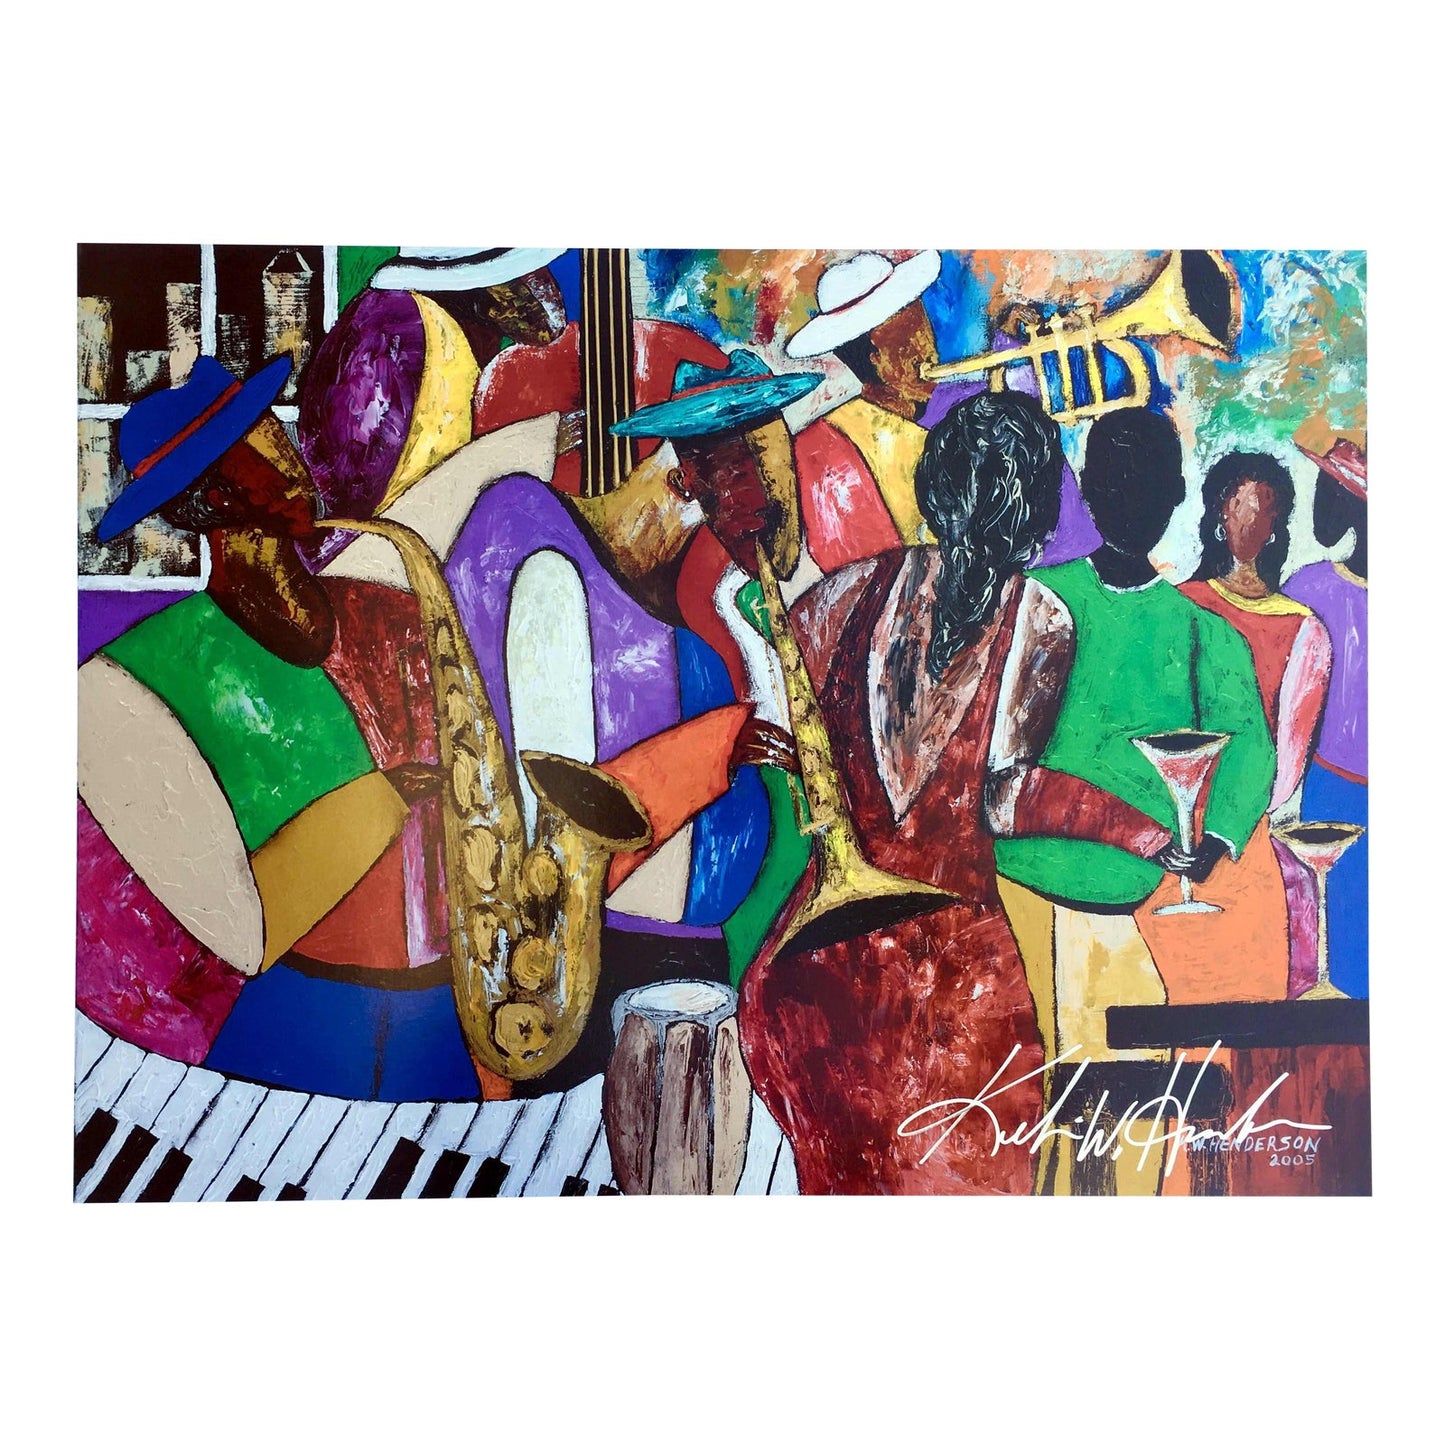 Modern "B' More Jazz" Baltimore Black Arts Festival Poster by Keith Henderson